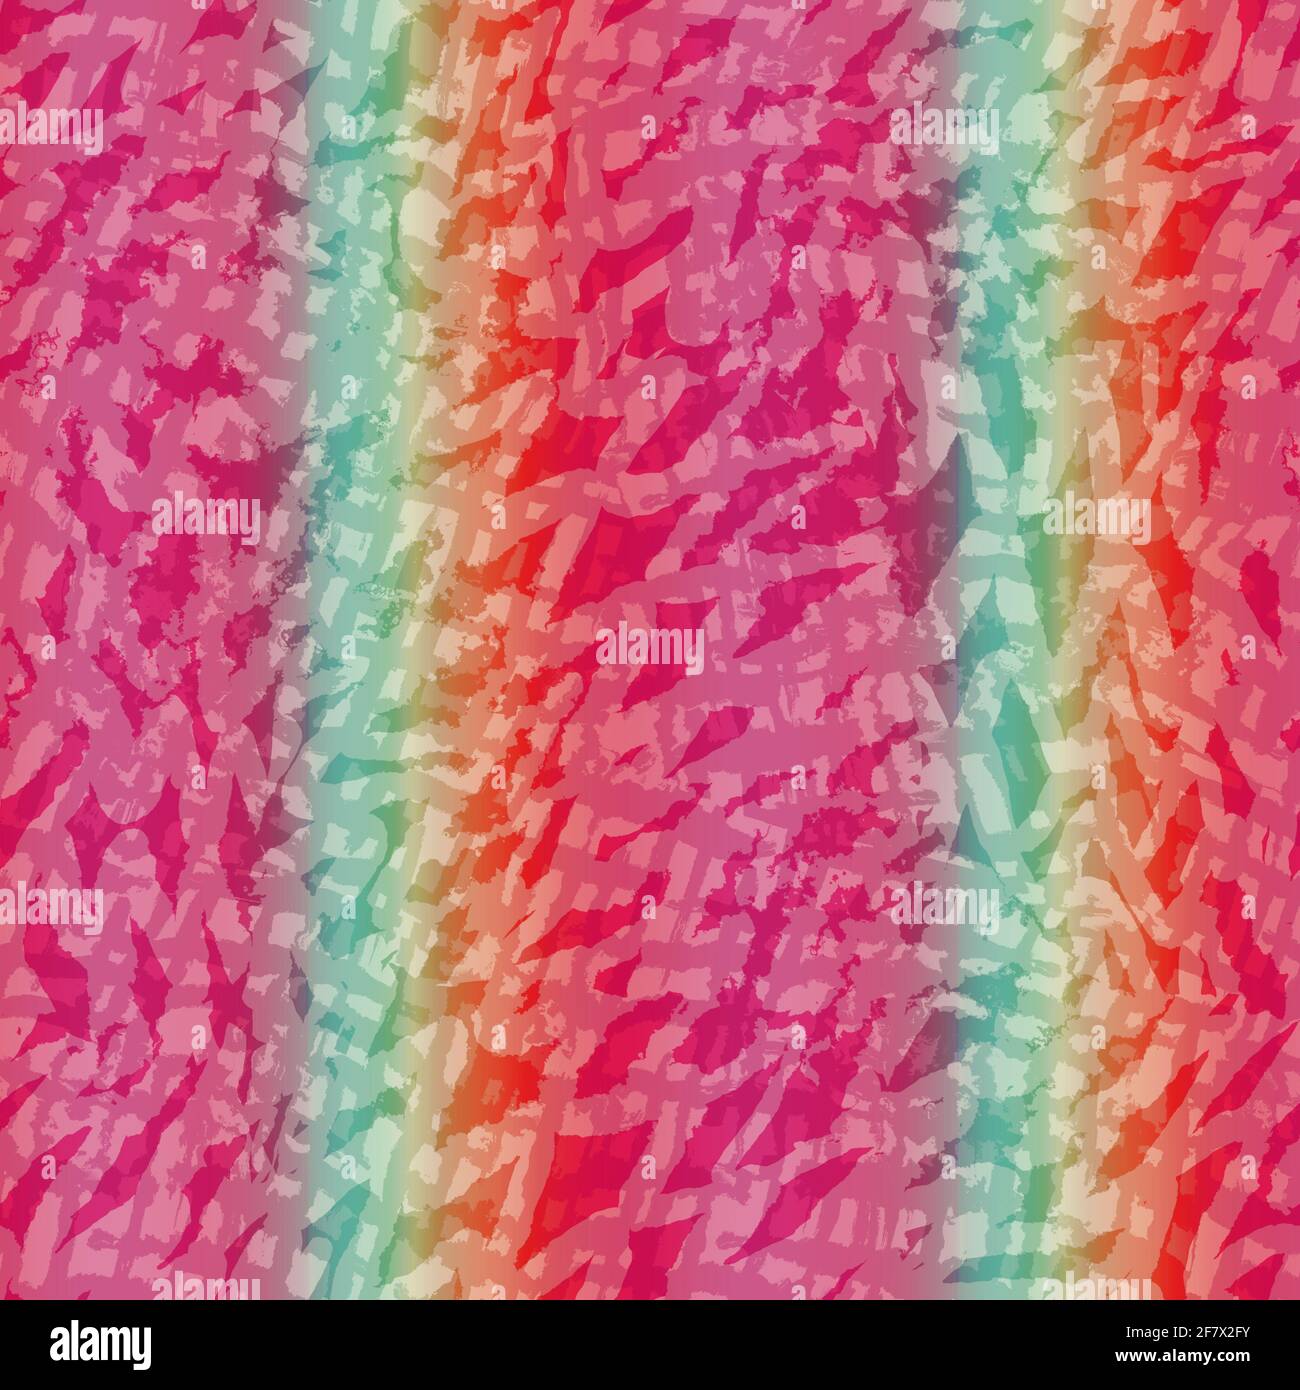 https://c8.alamy.com/comp/2F7X2FY/horizontal-blurry-ombre-blend-textured-stripe-background-variegated-pastel-line-melange-seamless-pattern-abstract-textured-all-over-print-retro-2F7X2FY.jpg